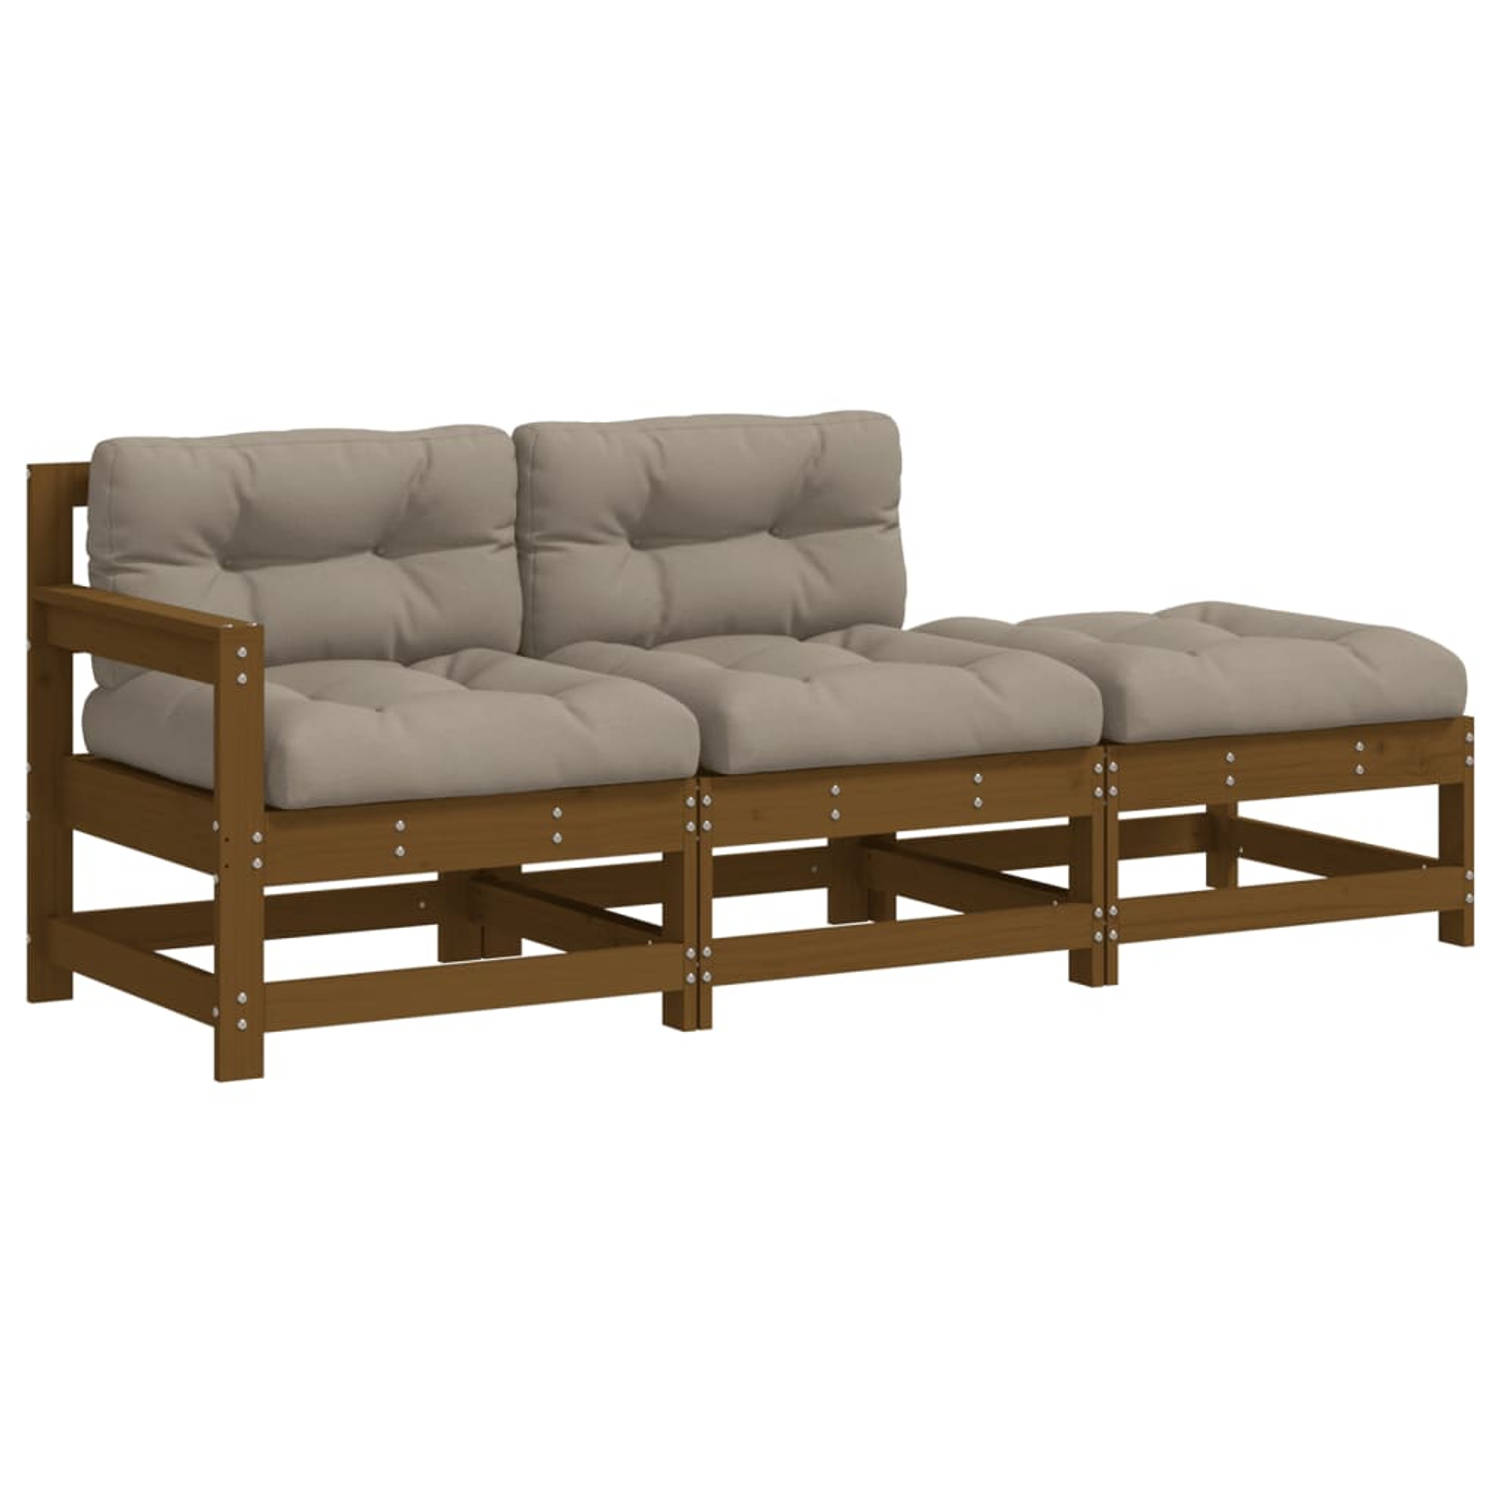 The Living Store Houten Loungeset - 62 x 62 x 70.5 cm - Massief grenenhout - Taupe kussens